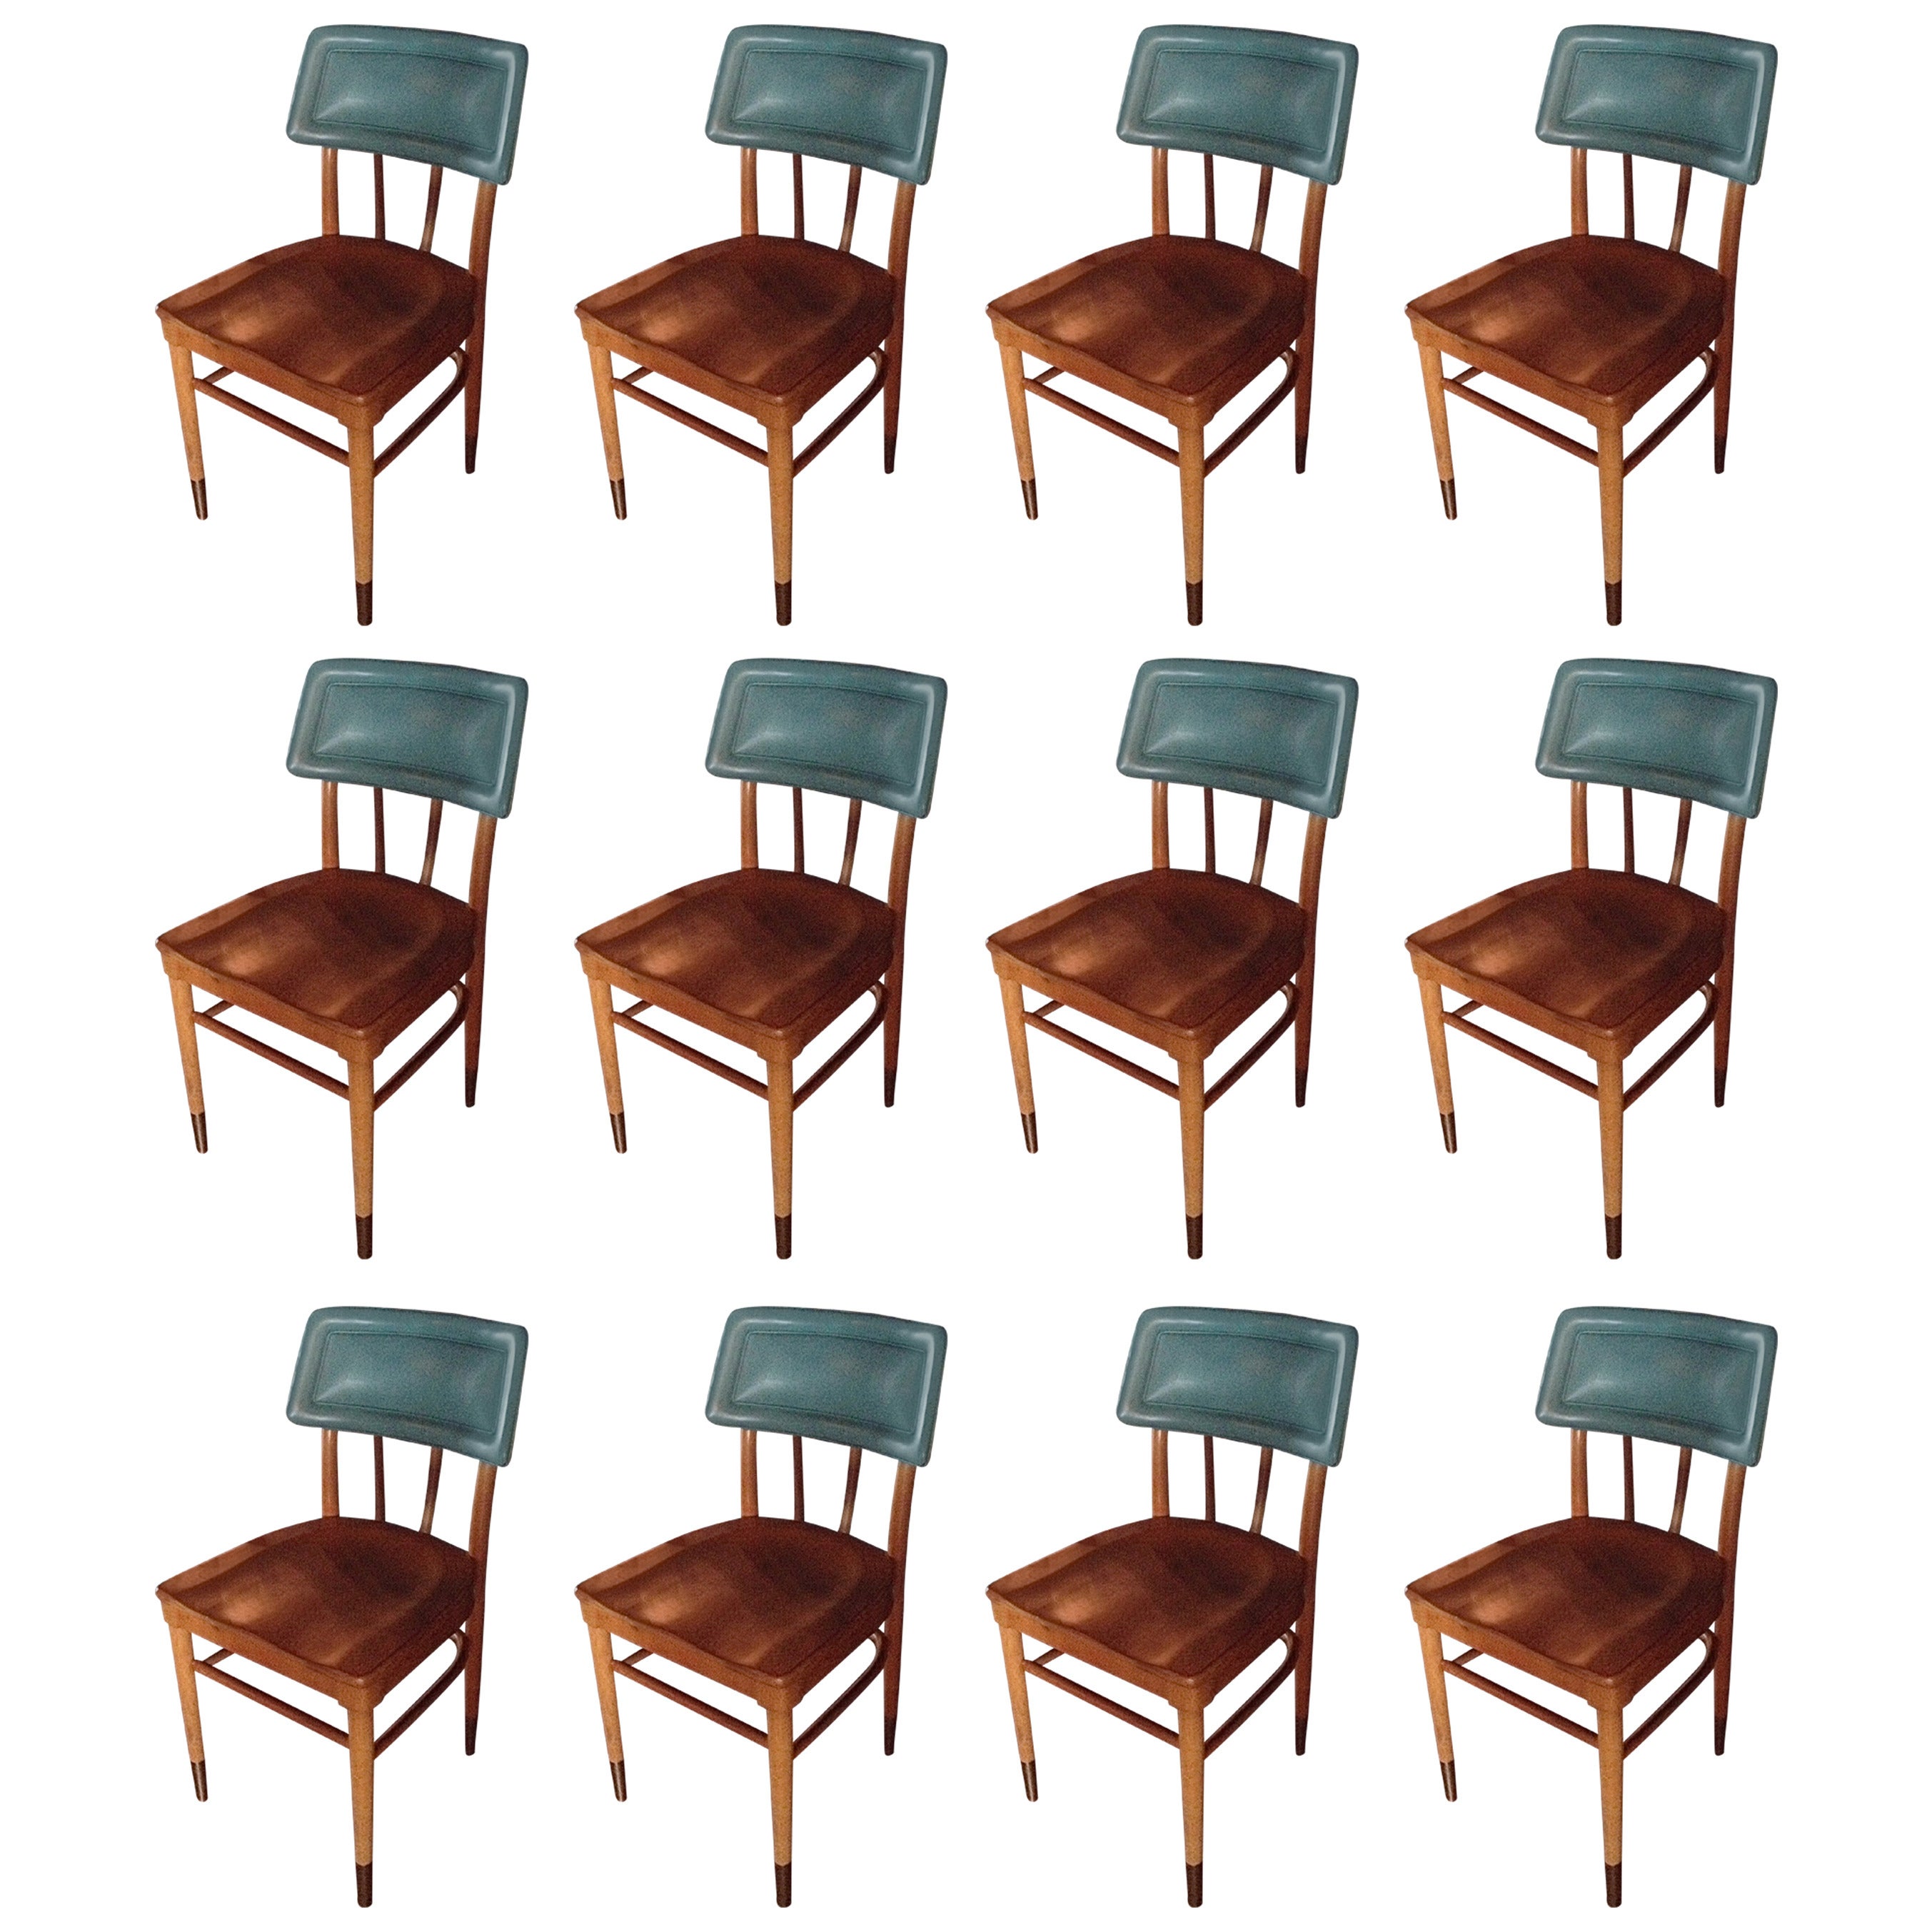 Set of 16 Thonet Midcentury Side Chairs with Turquoise Upholstered Back